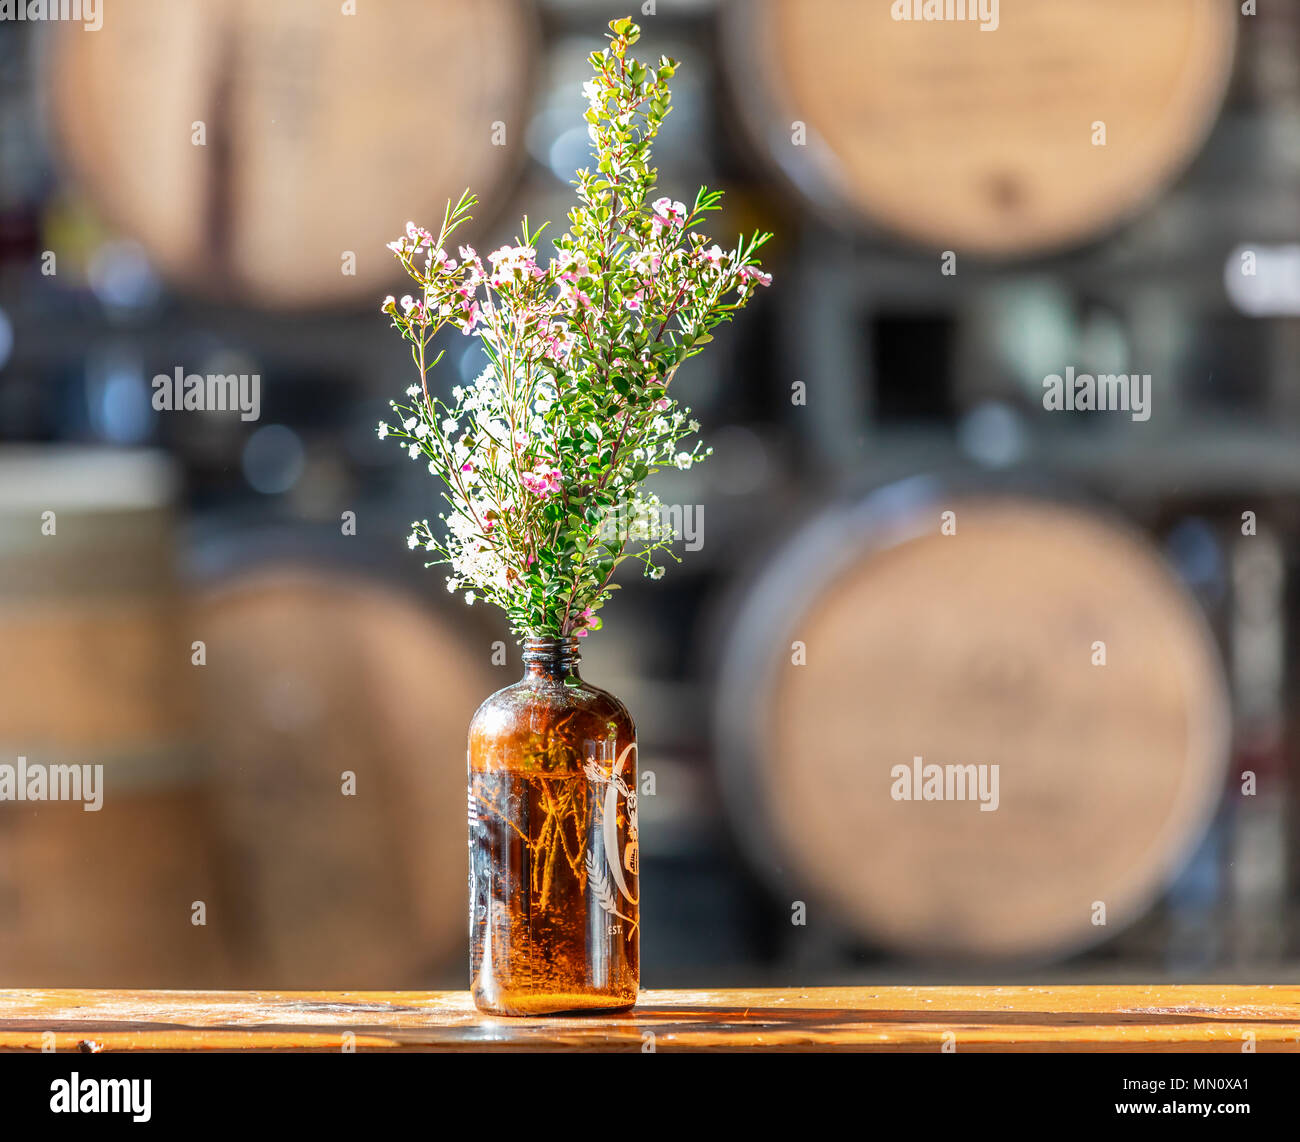 fresh cut wild flowers in a brown bottle with large barrels in the background Stock Photo